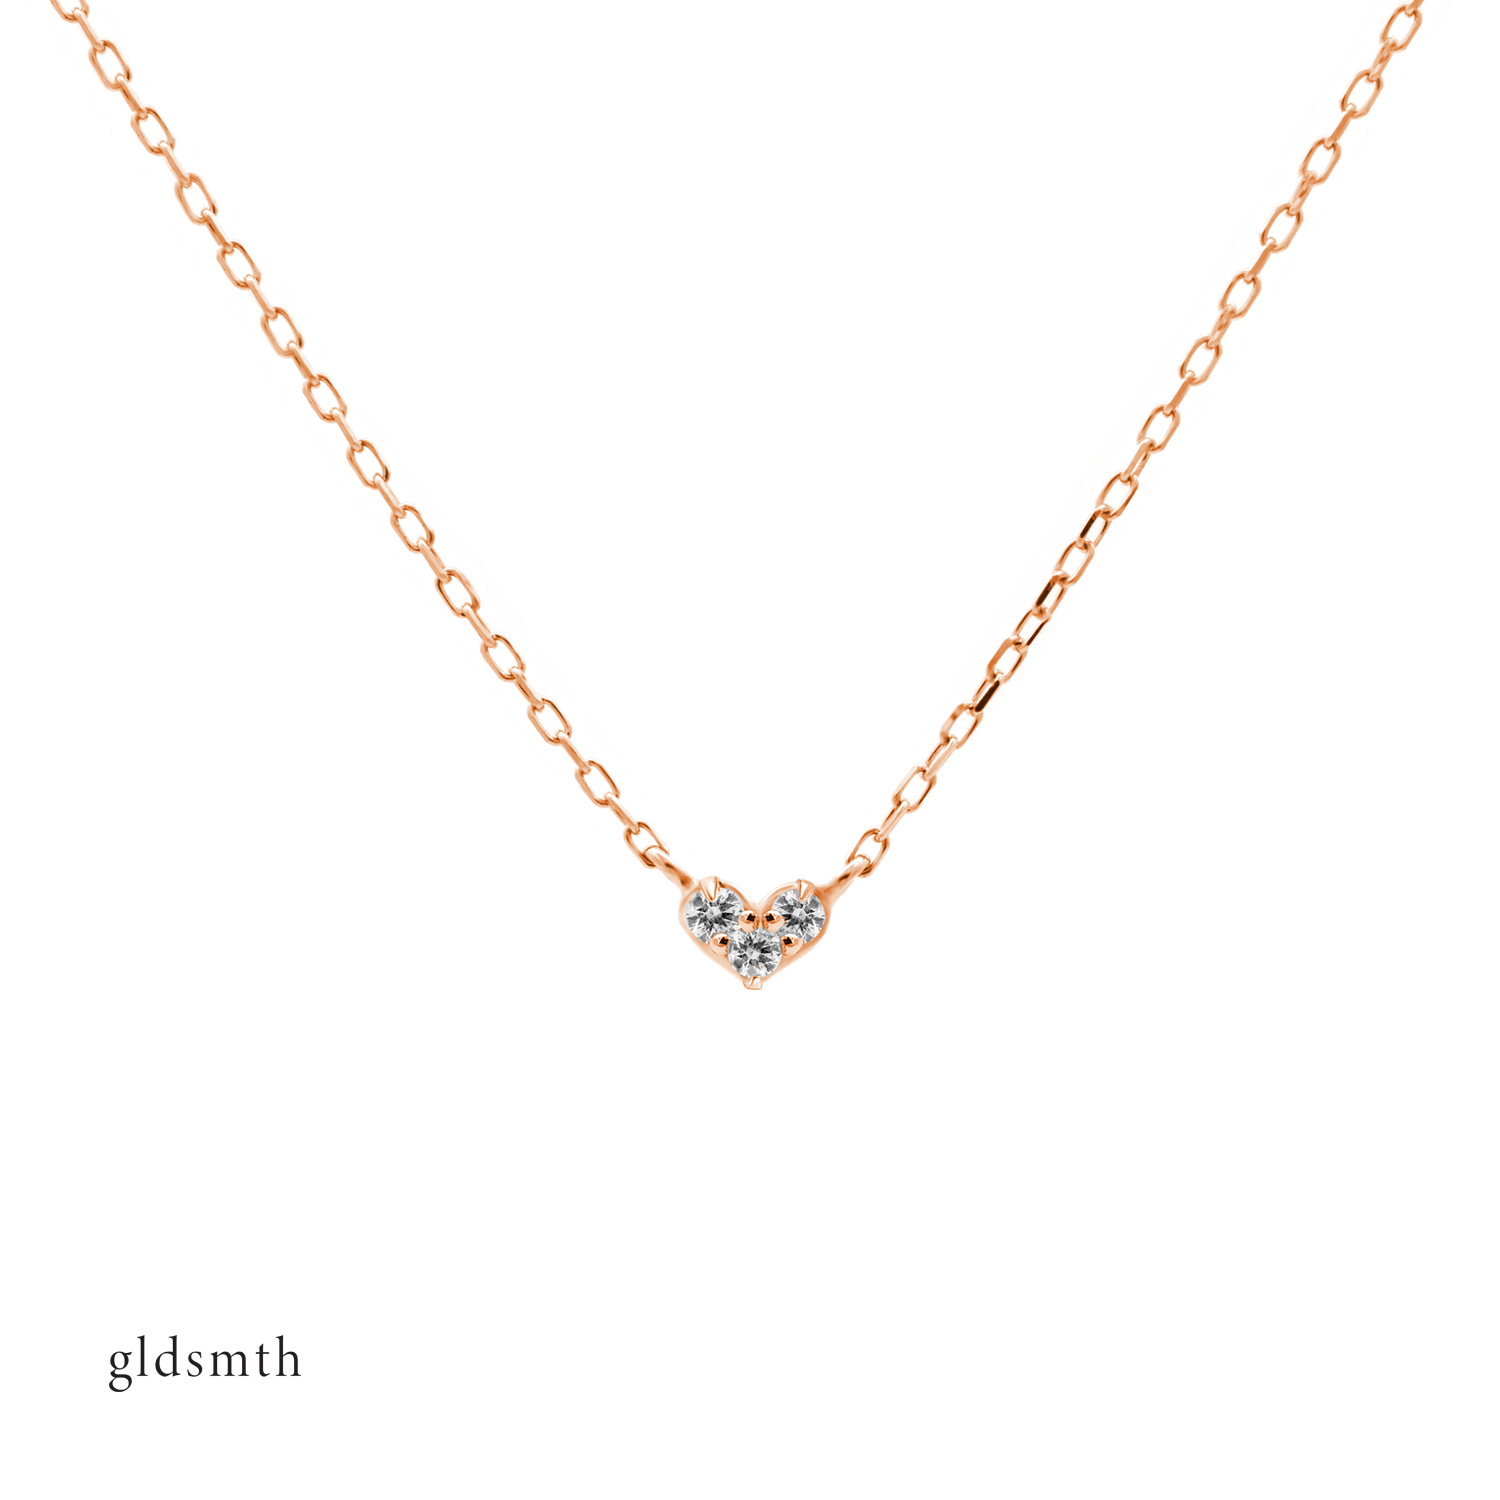 Stunning and fine handcrafted 10k solid rose gold necklace with conflict-free diamonds.